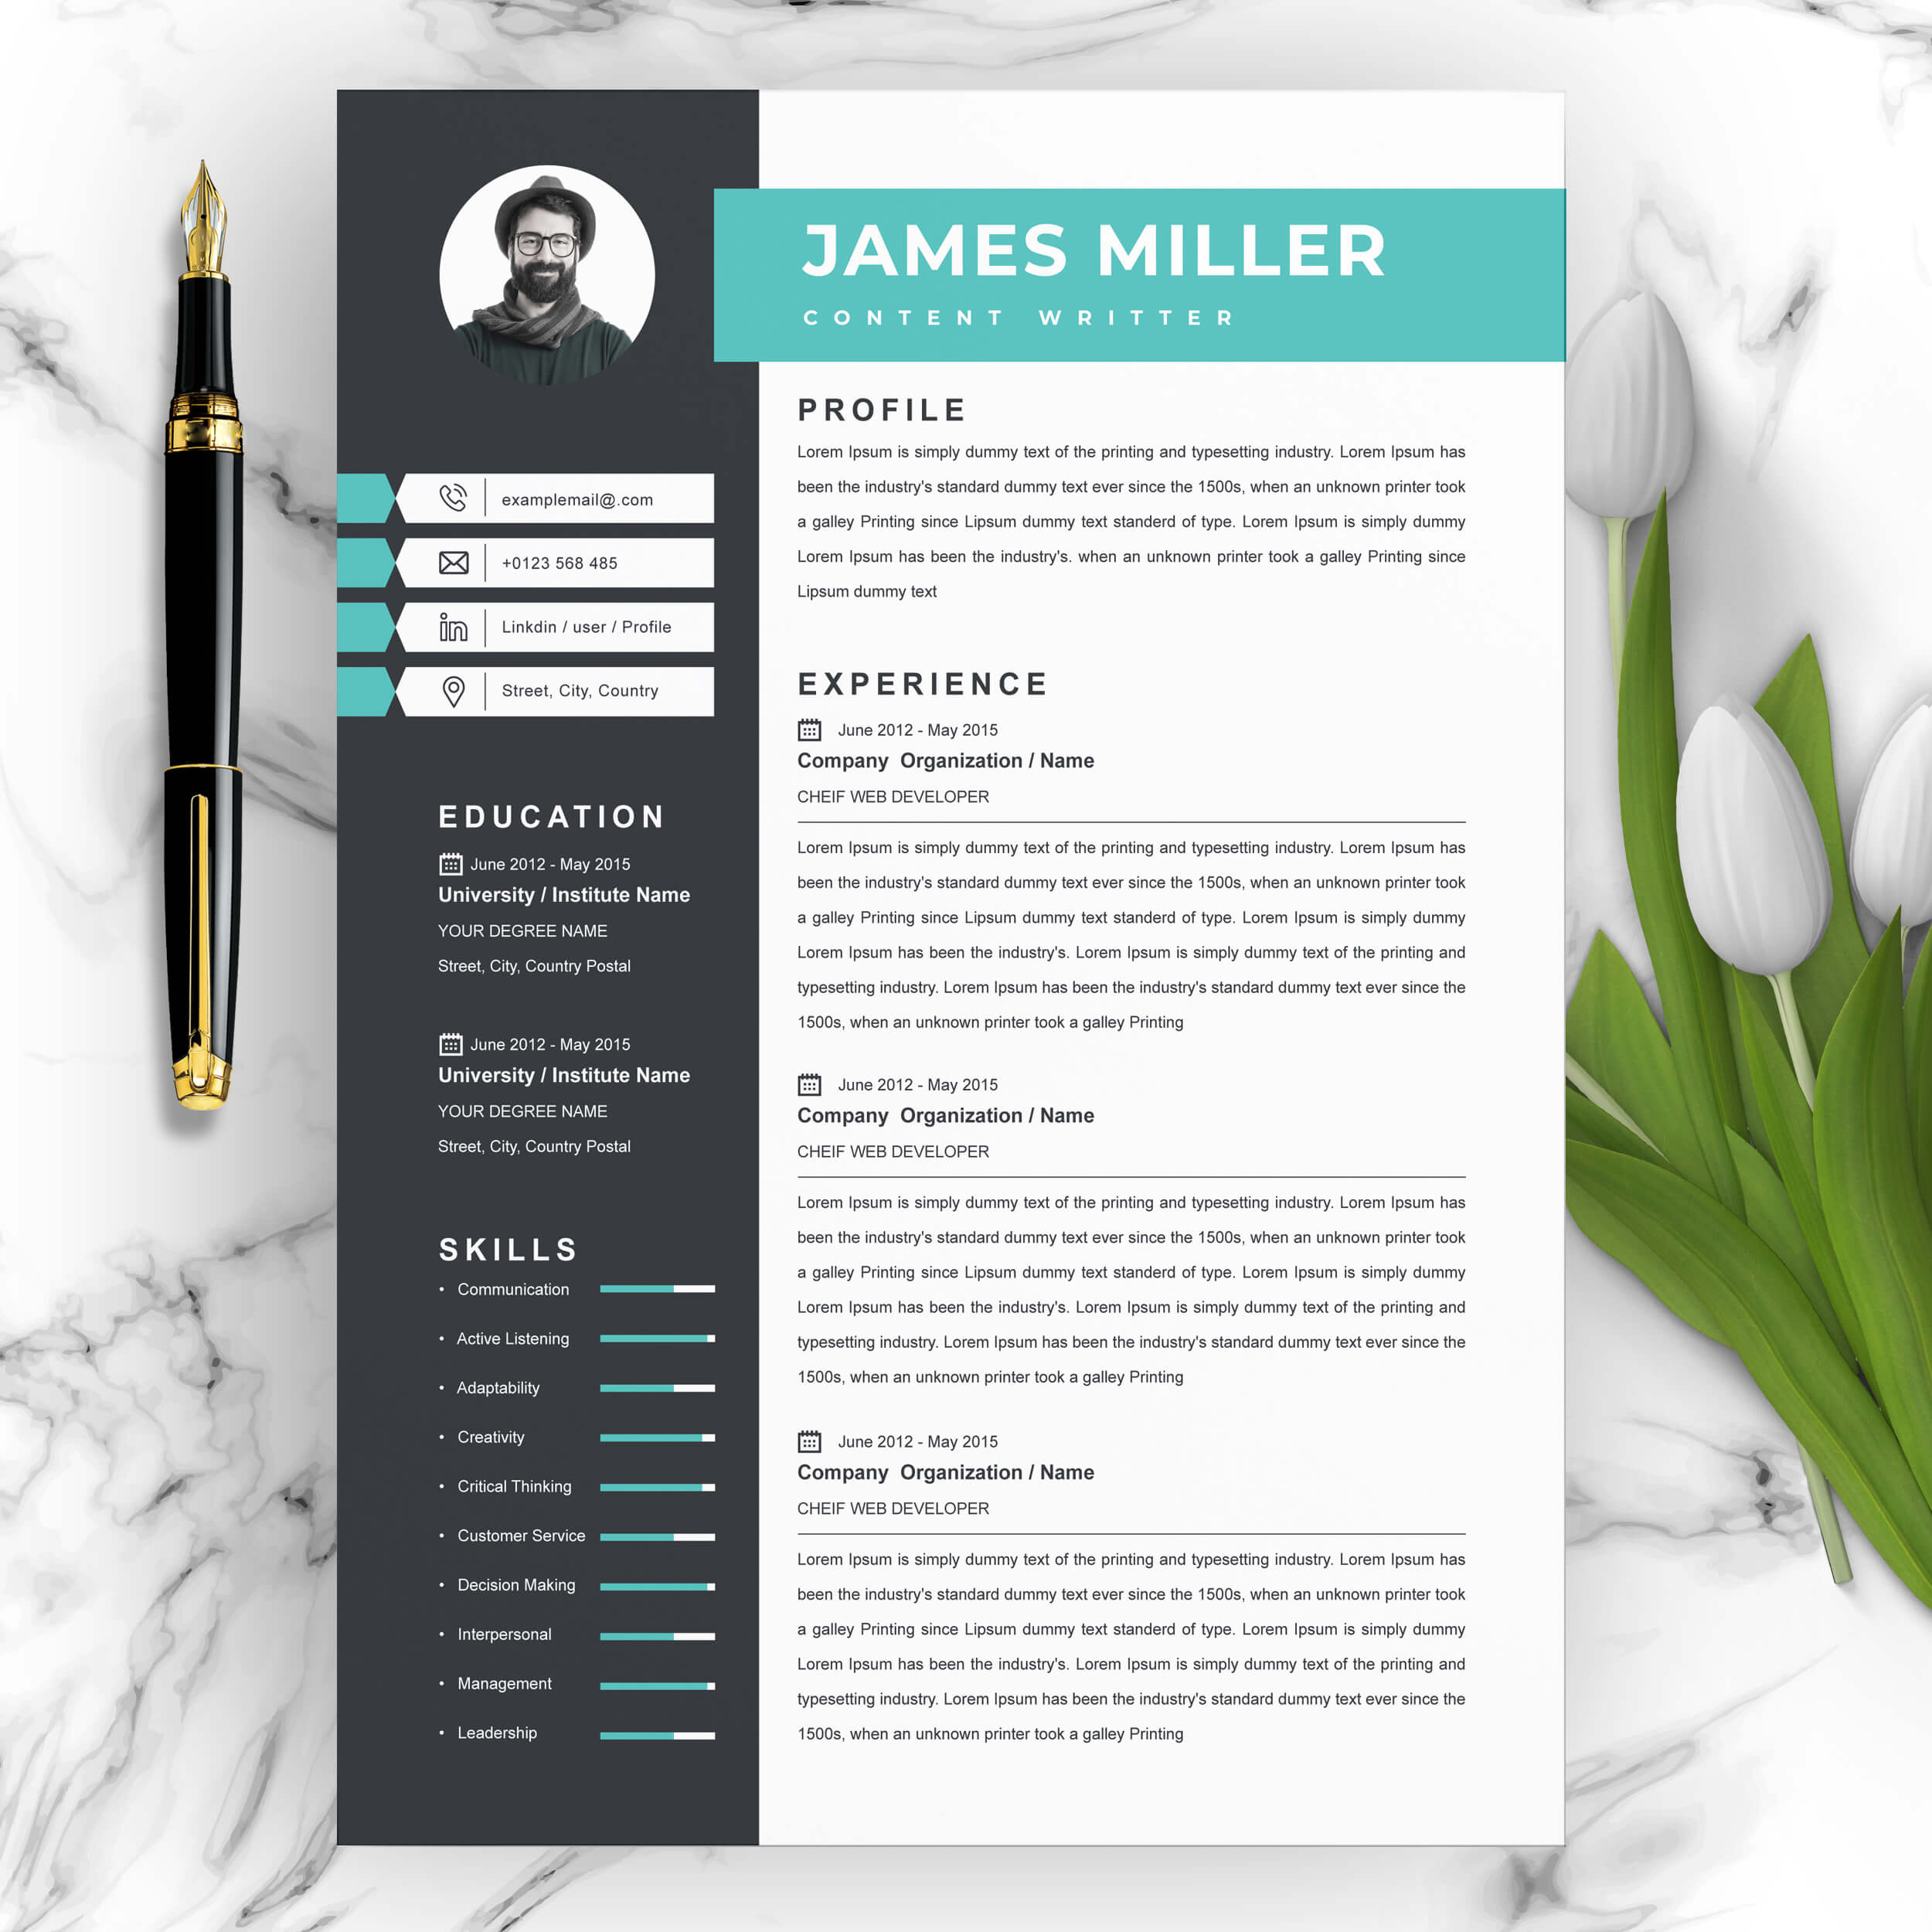 Content Writer Professional Resume Template | CV Template | Resume Template in Word PSD Format cover image.